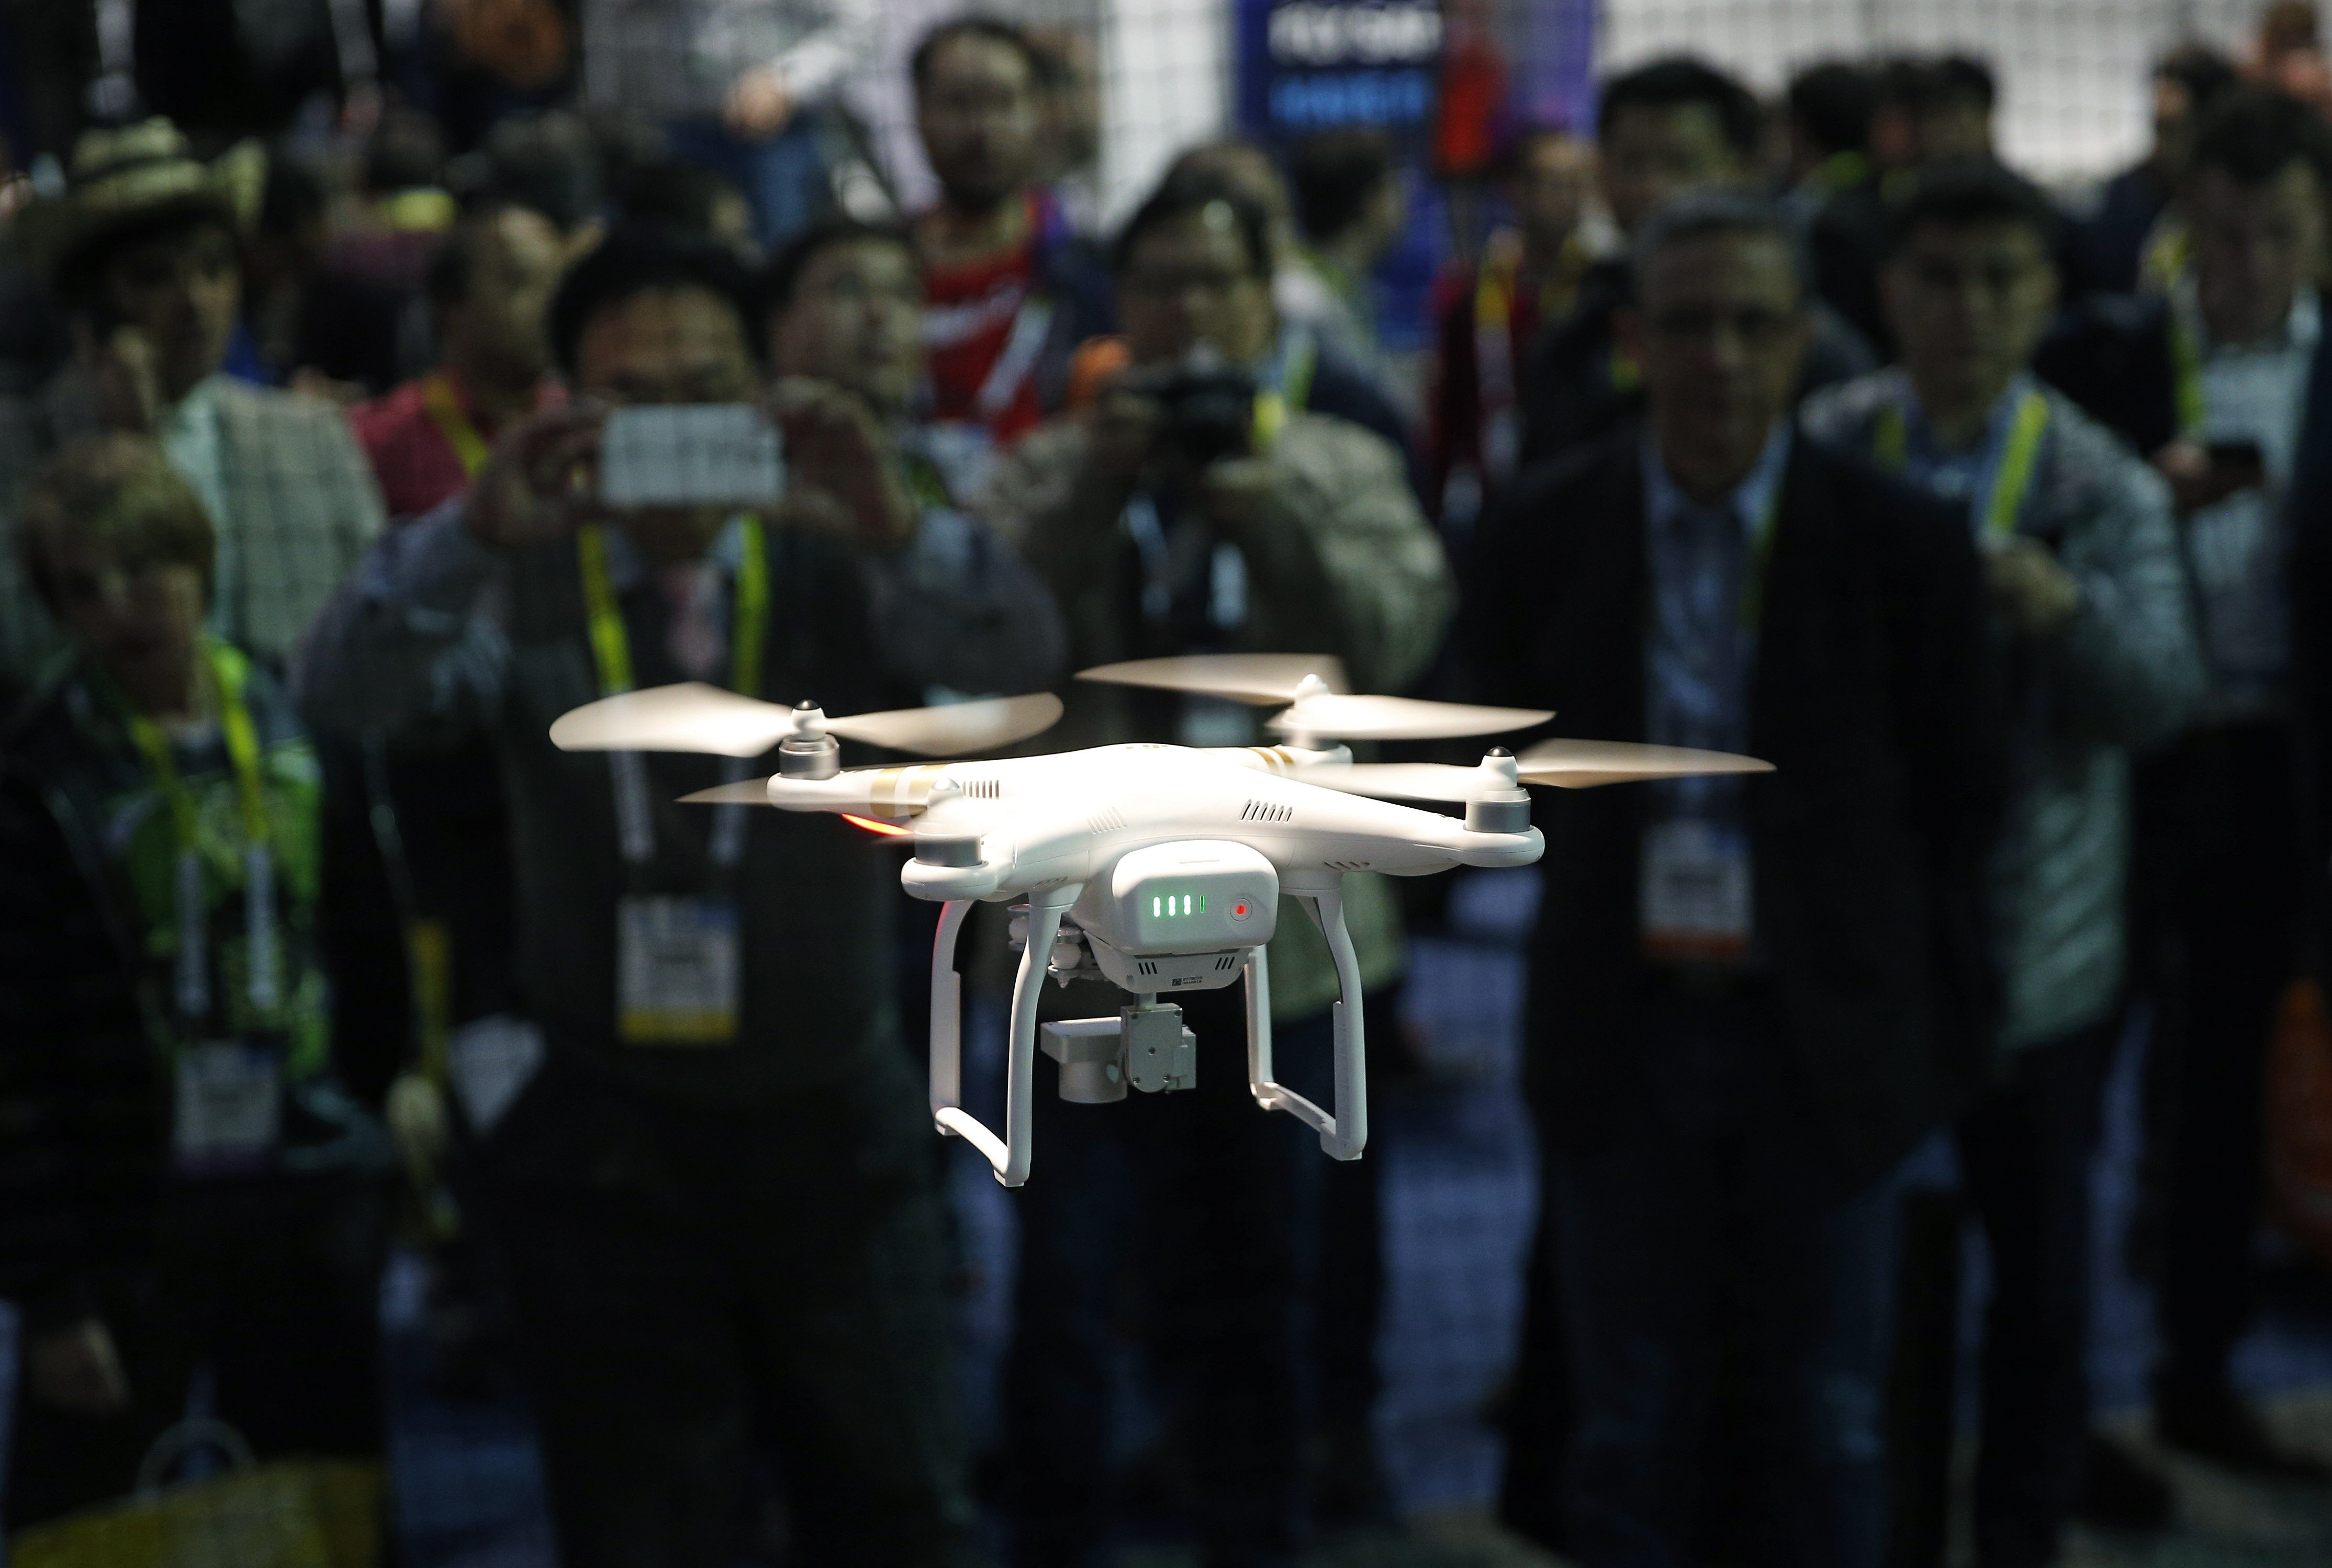 DJI said it has developed security measures such as embedding password and data encryption in its products. Photo: AP